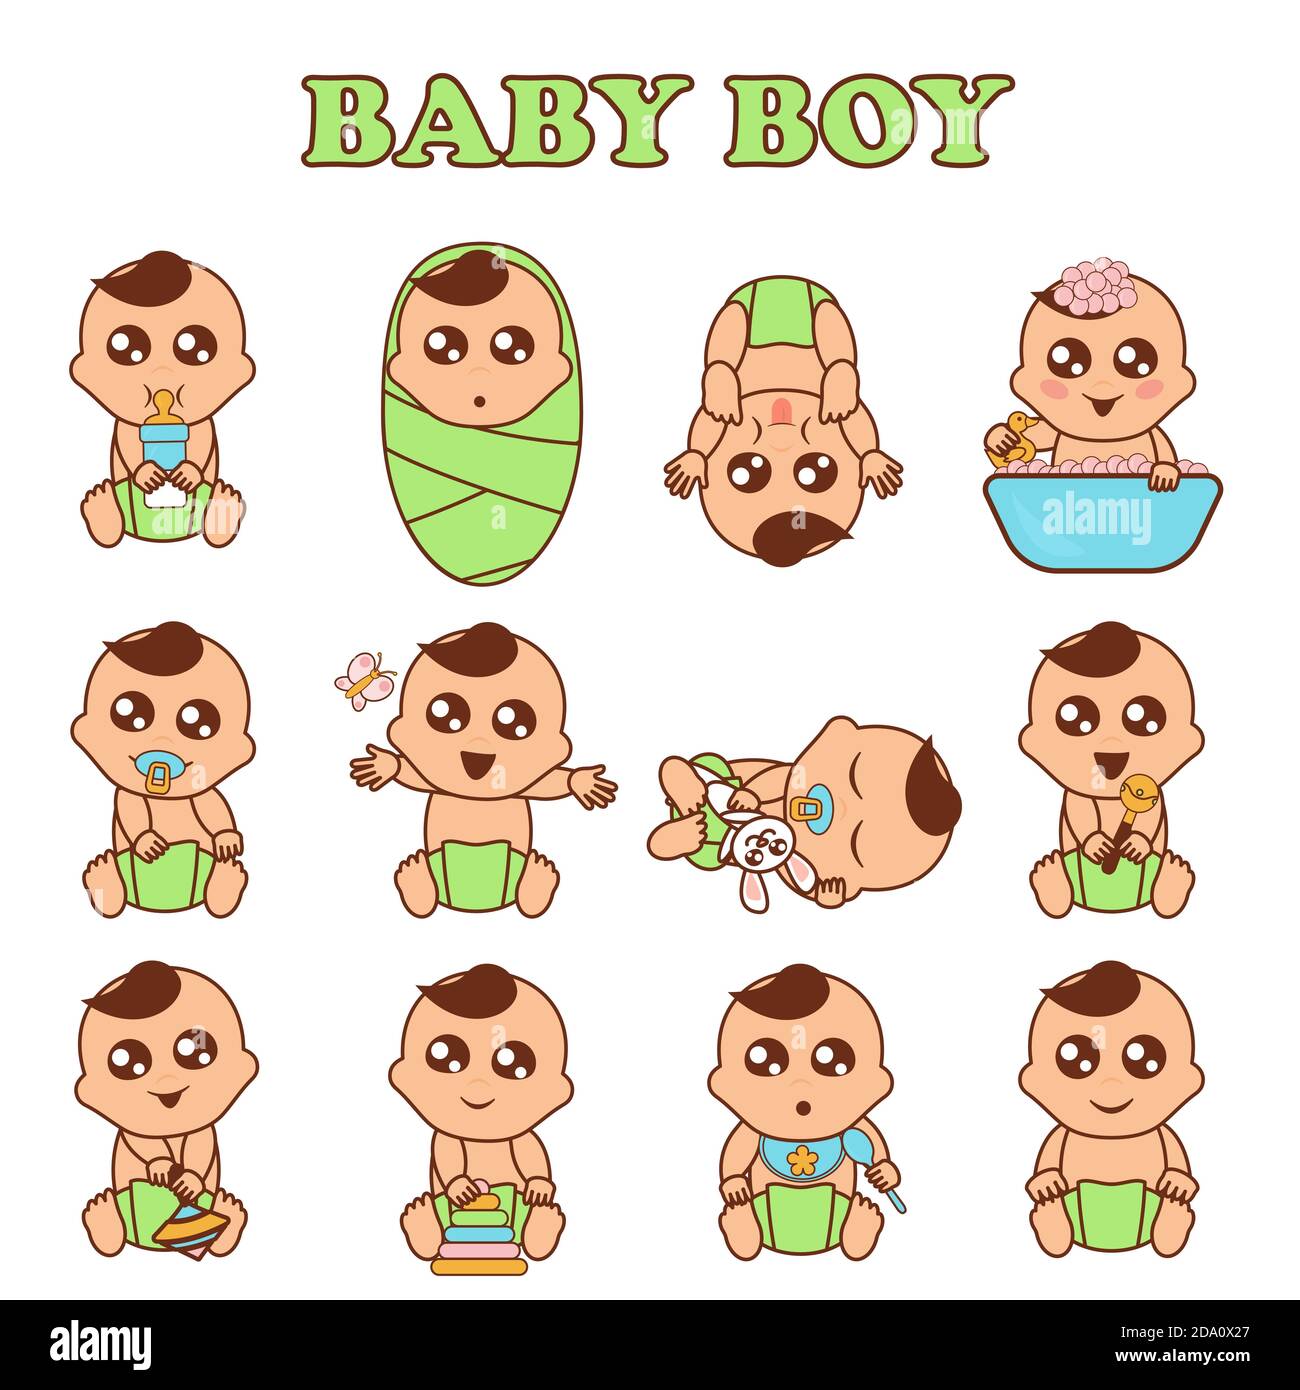 Baby boy set vector illustration. Cute boys in various poses and emotions in flat style. Stock Vector